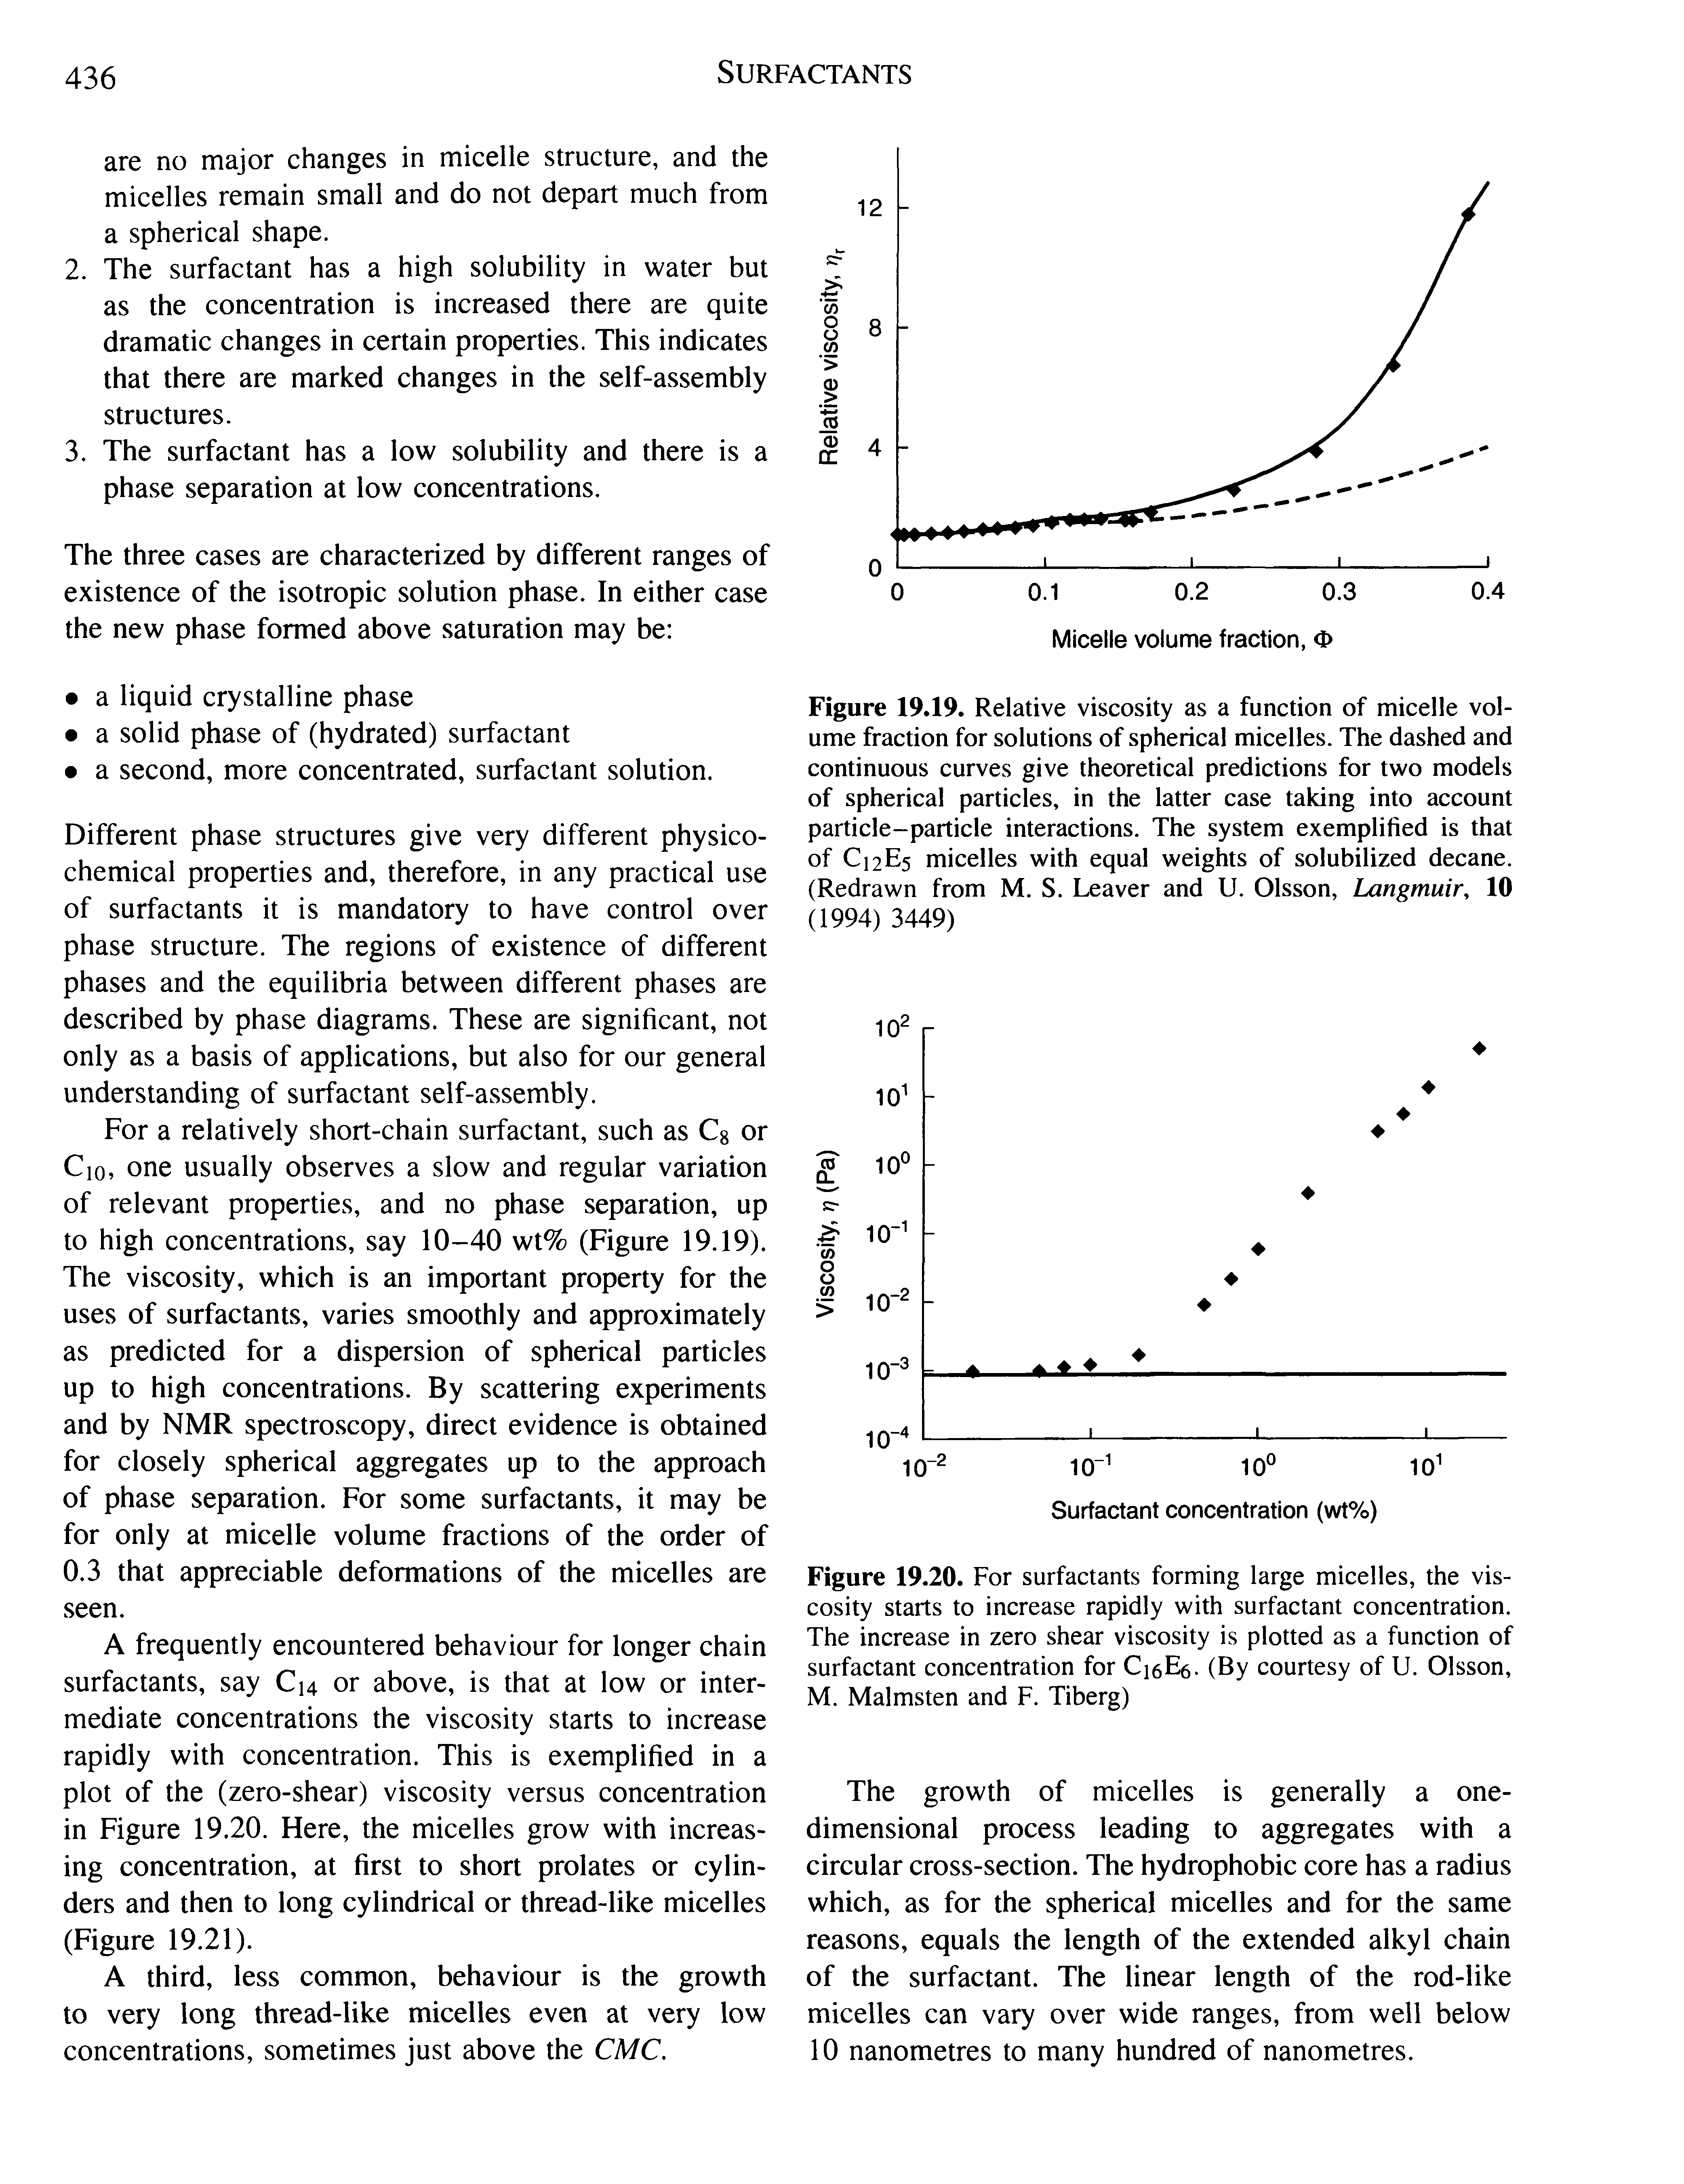 Figure 19.19. Relative viscosity as a function of micelle volume fraction for solutions of spherical micelles. The dashed and continuous curves give theoretical predictions for two models of spherical particles, in the latter case taking into account particle-particle interactions. The system exemplified is that of C12E5 micelles with equal weights of solubilized decane. (Redrawn from M. S. Leaver and U. Olsson, Langmuiry 10 (1994) 3449)...